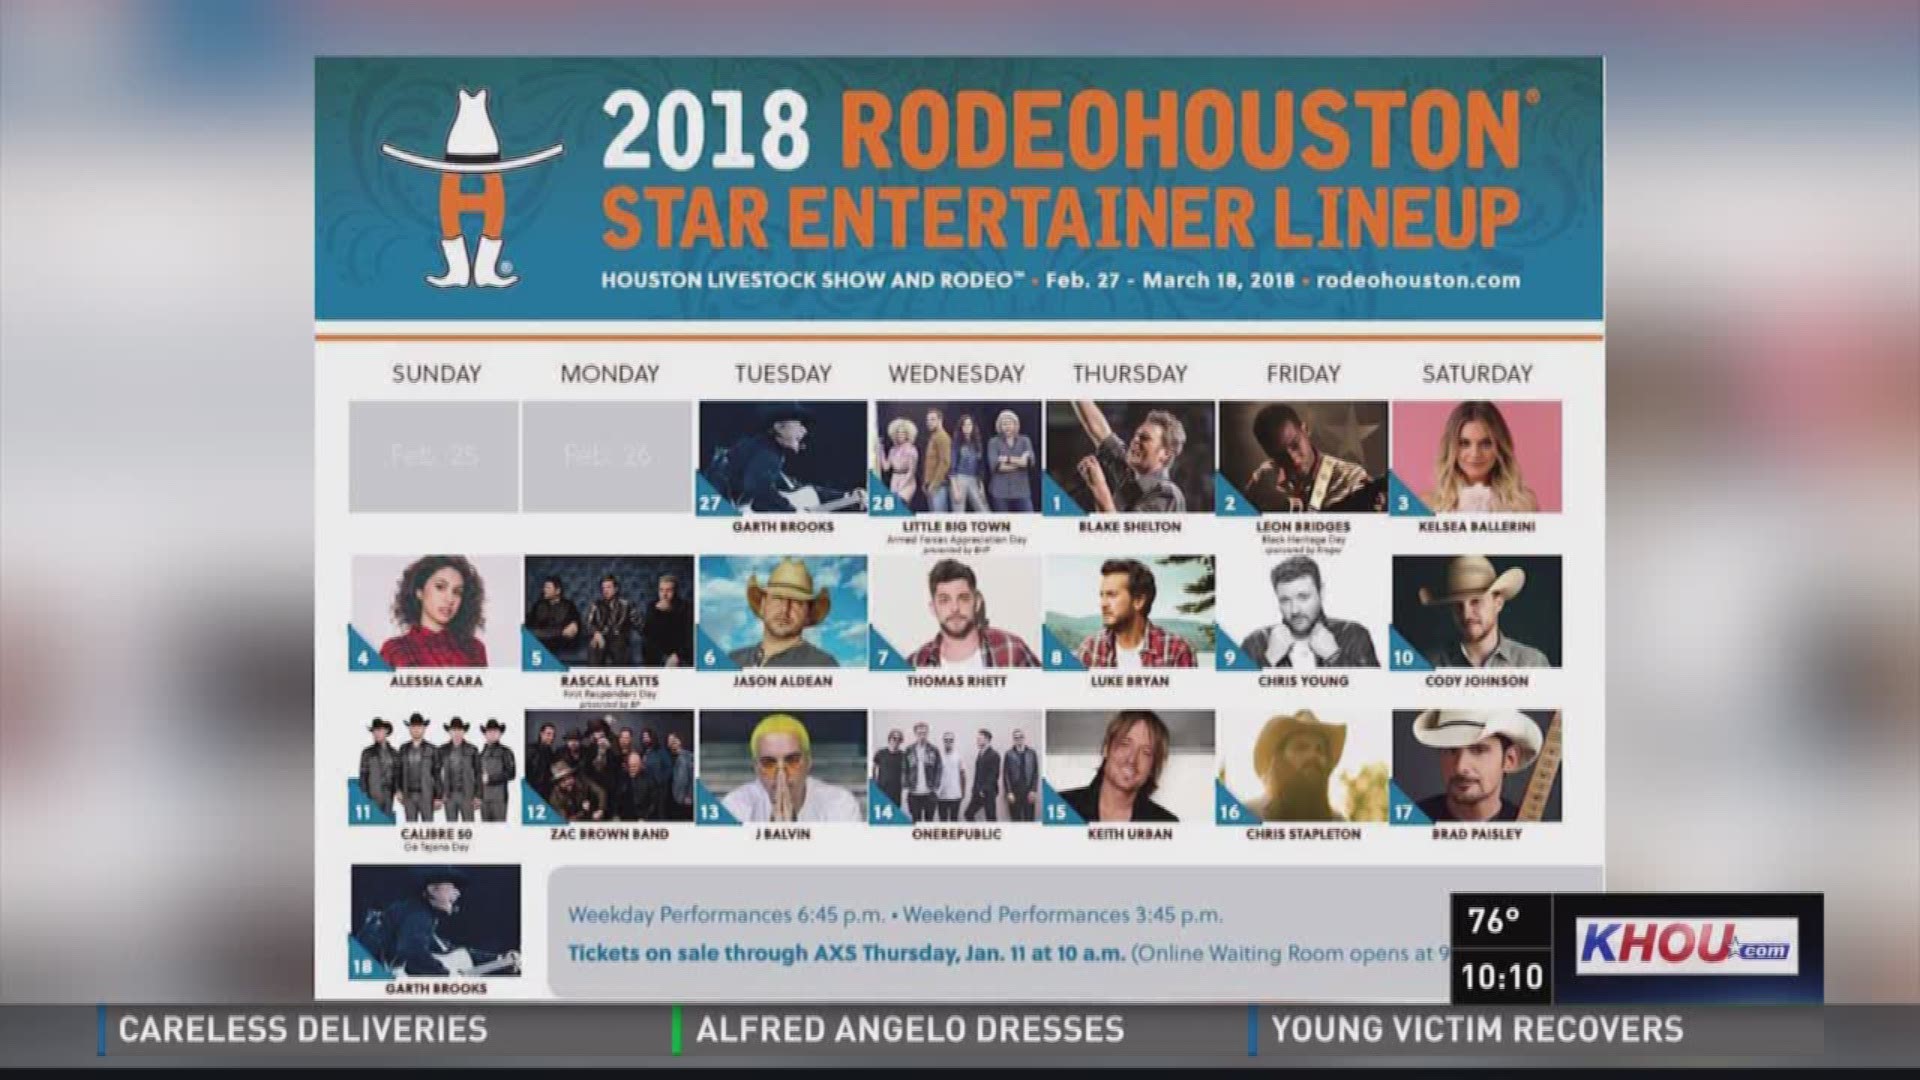 Set out a time Thursday morning to get your RodeoHouston tickets as they will be on sale starting at 10 a.m.